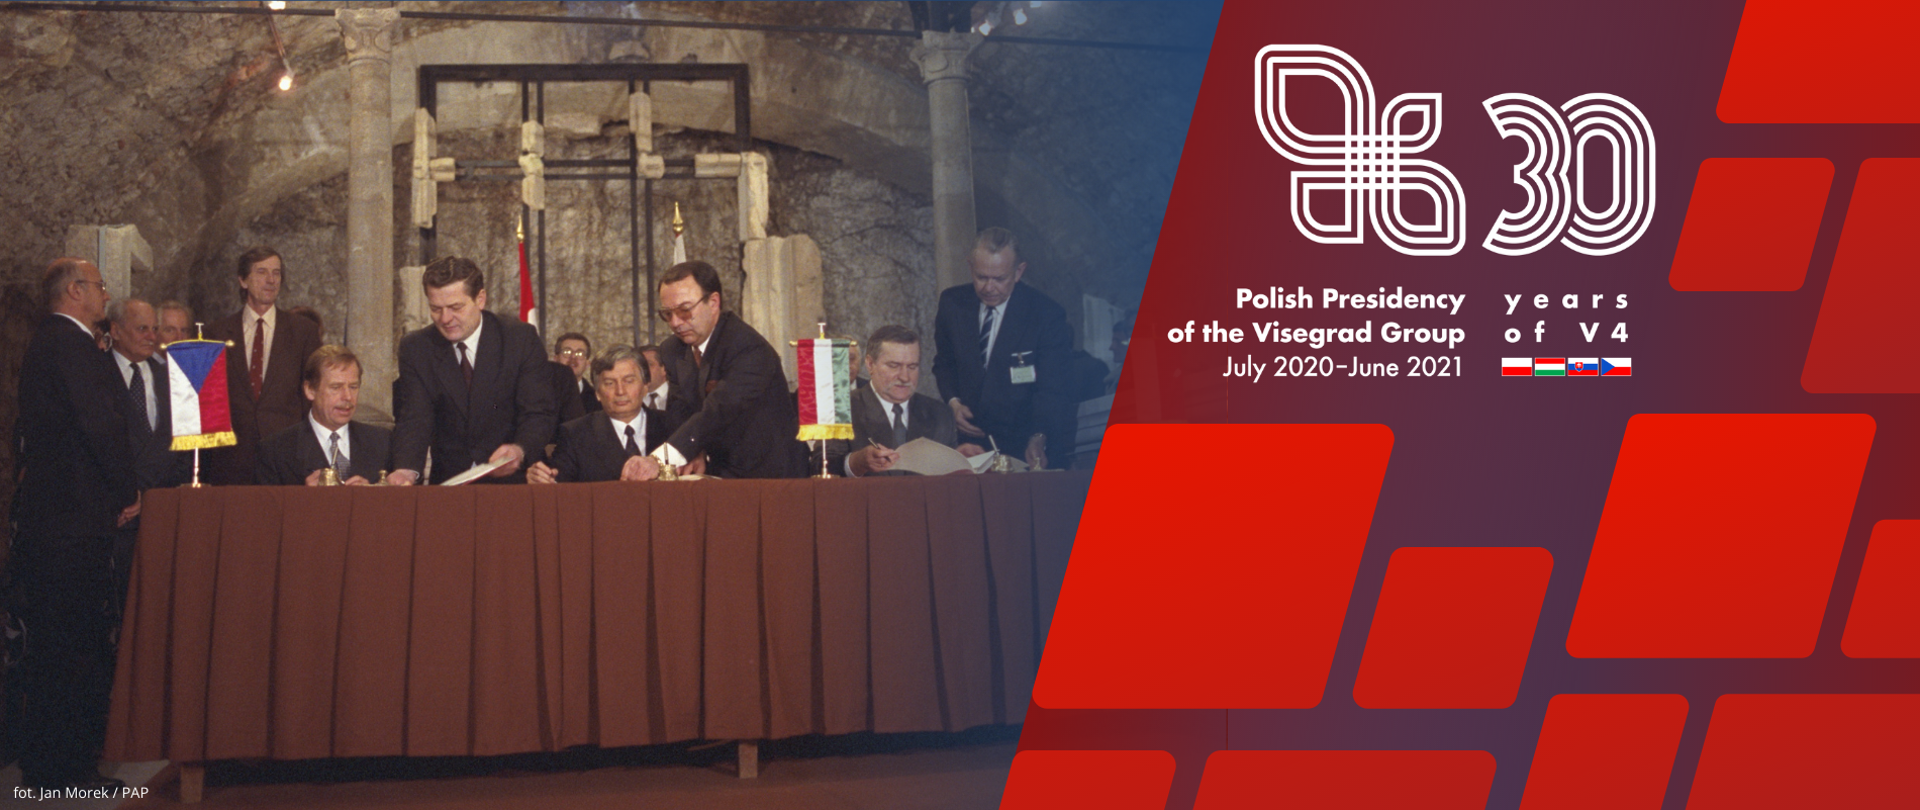 30 Years of the Visegrad Group - Polish Presidency of the V4 2021